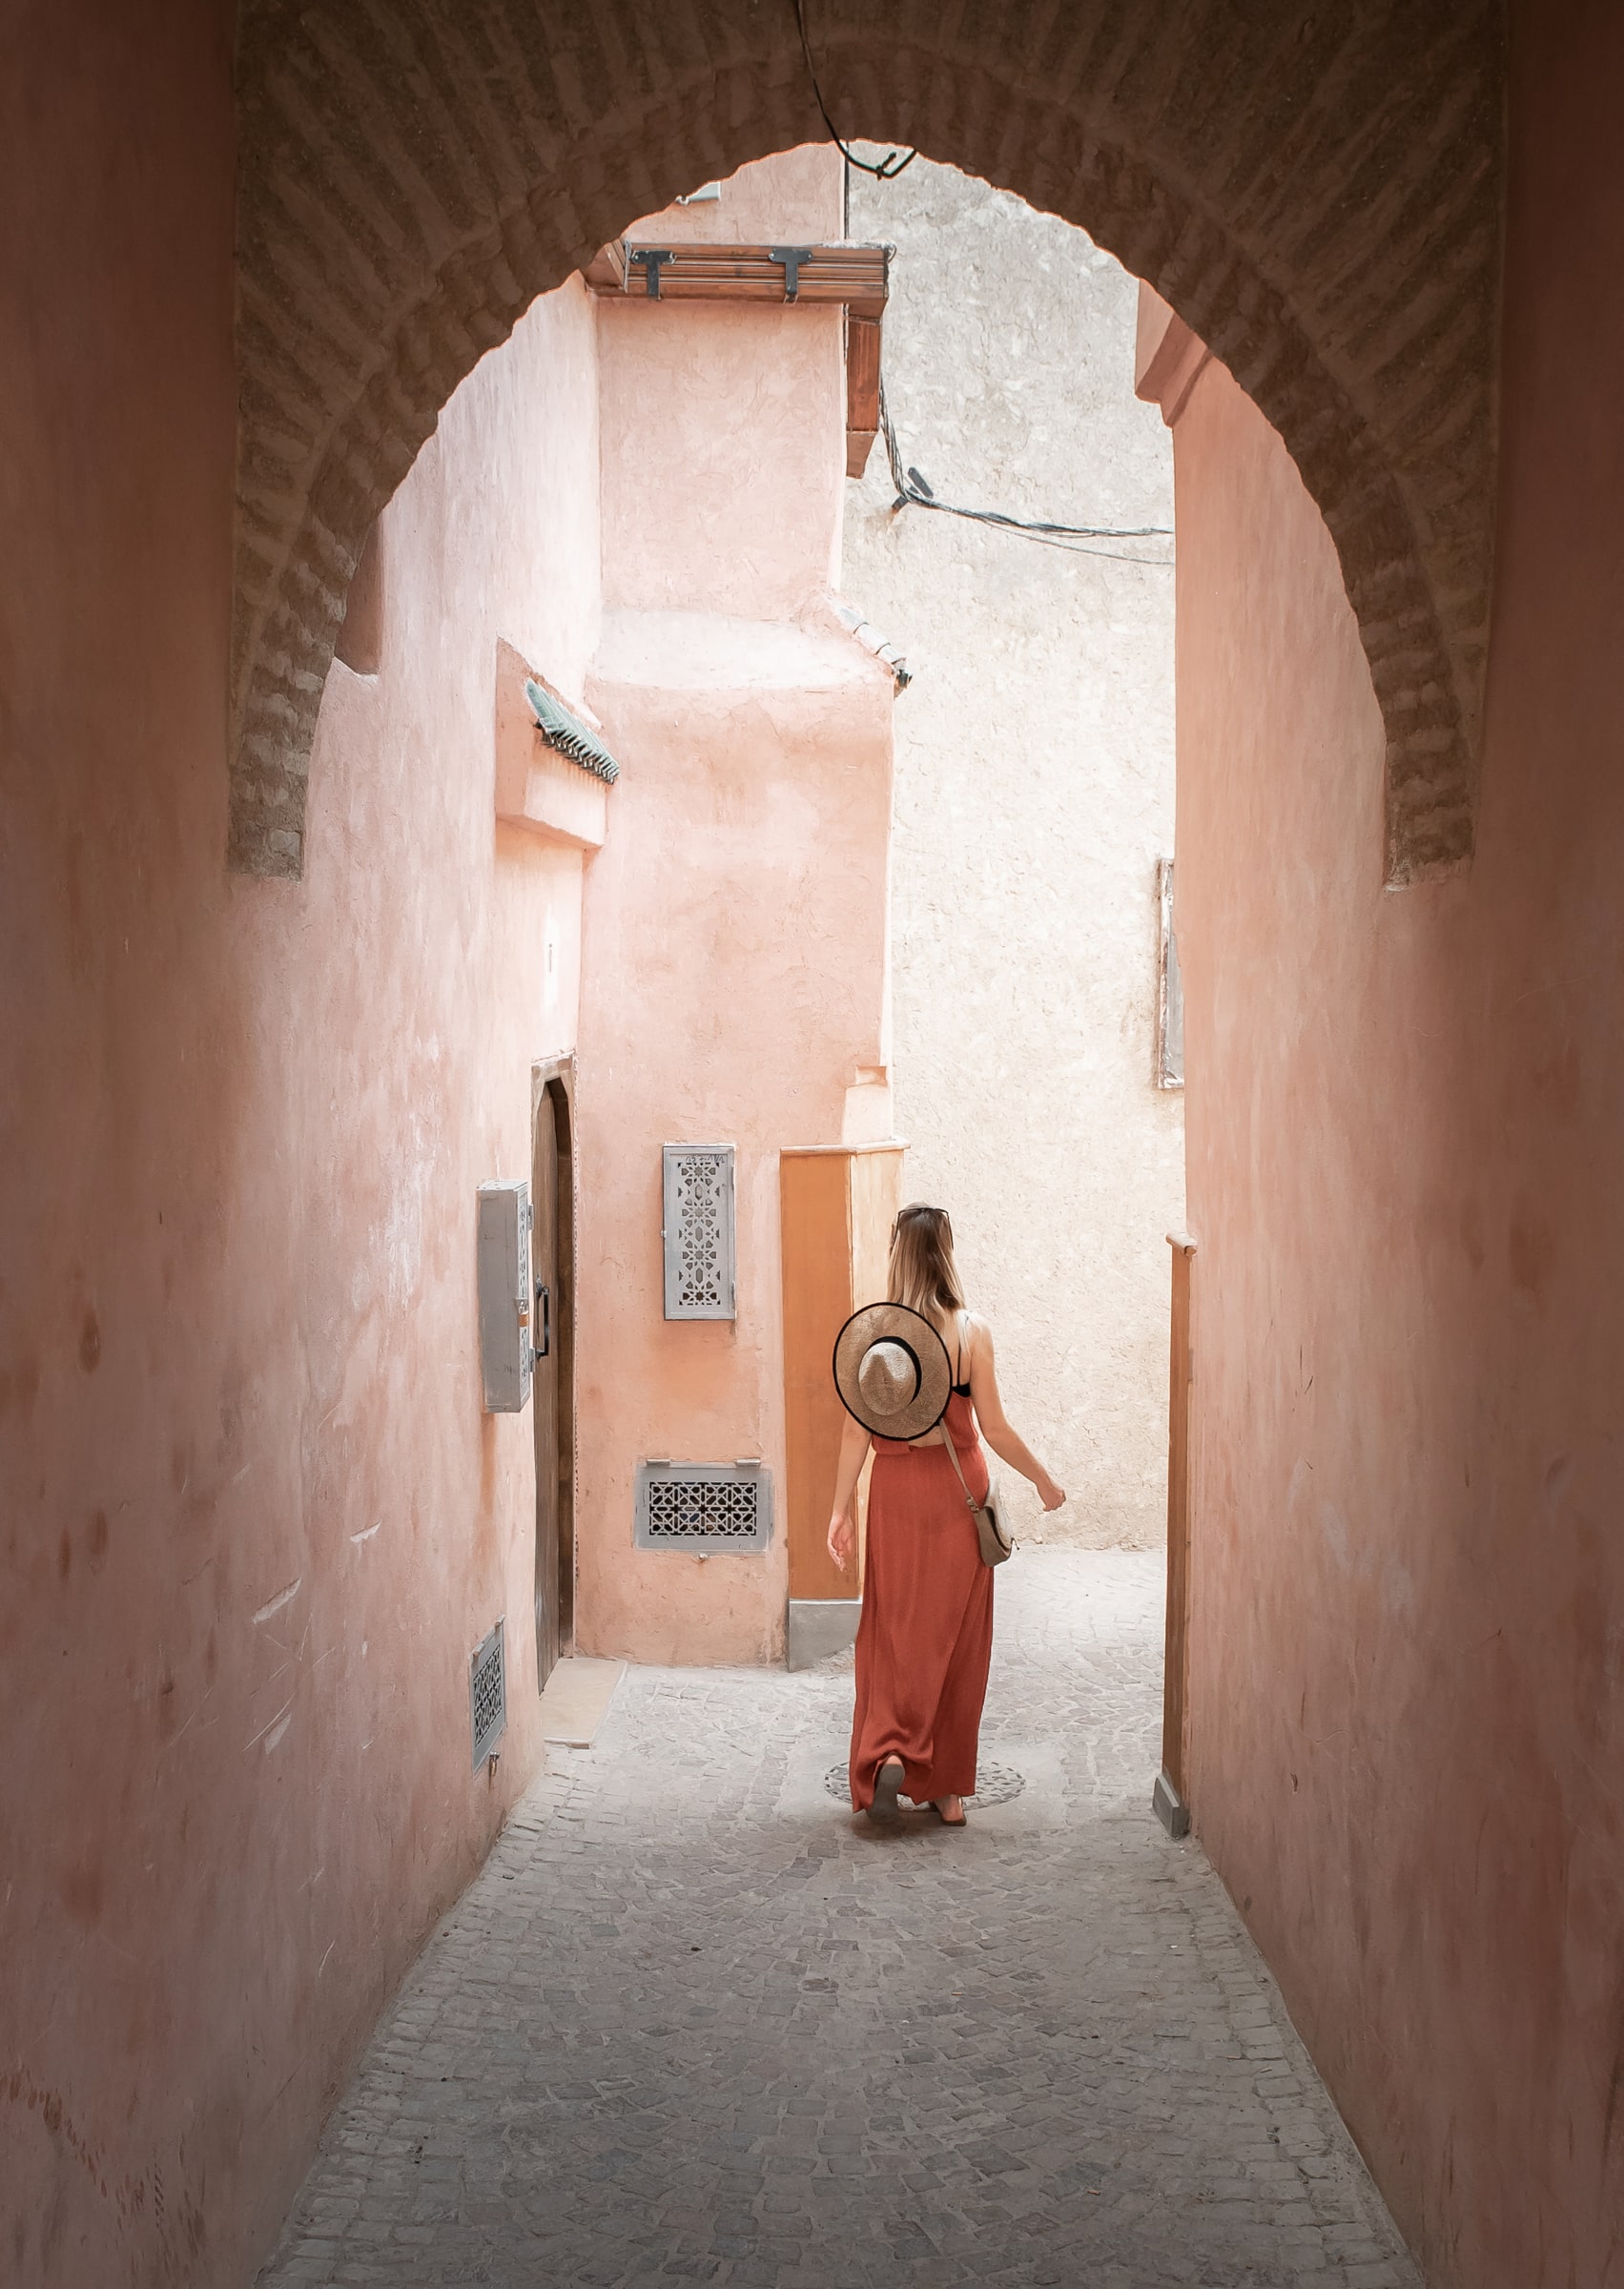 A woman walking through an archway in an Arabic style town